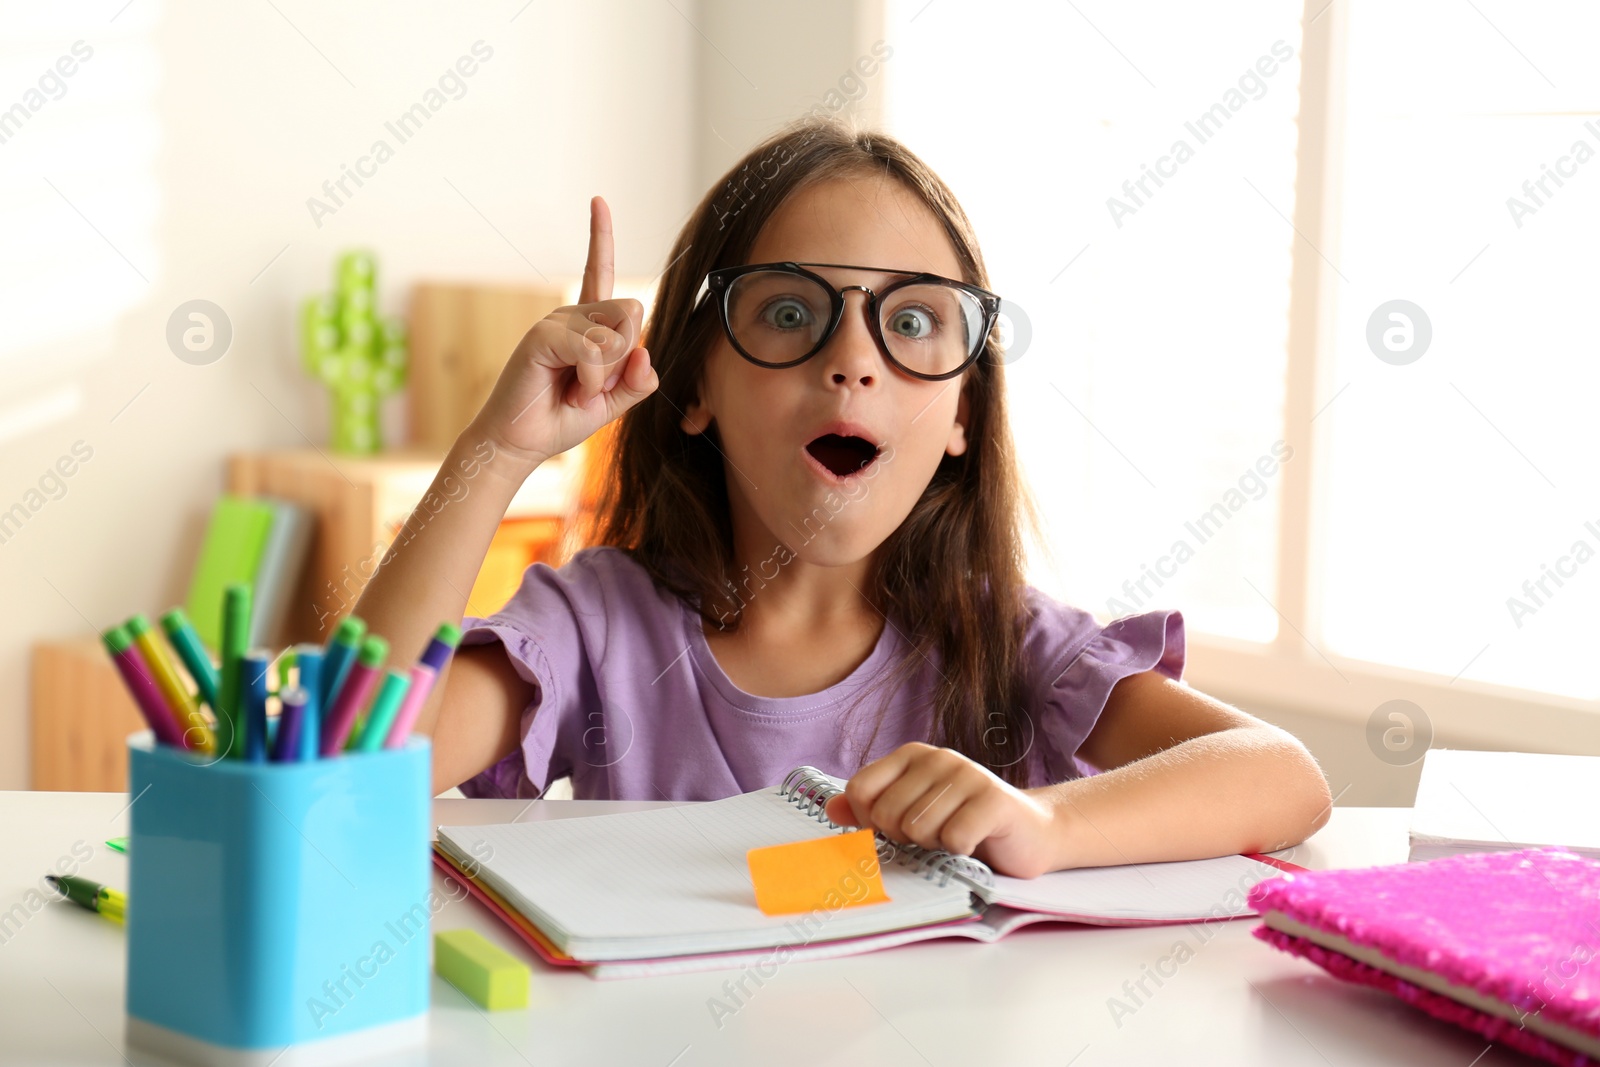 Photo of Emotional little girl doing homework at table indoors